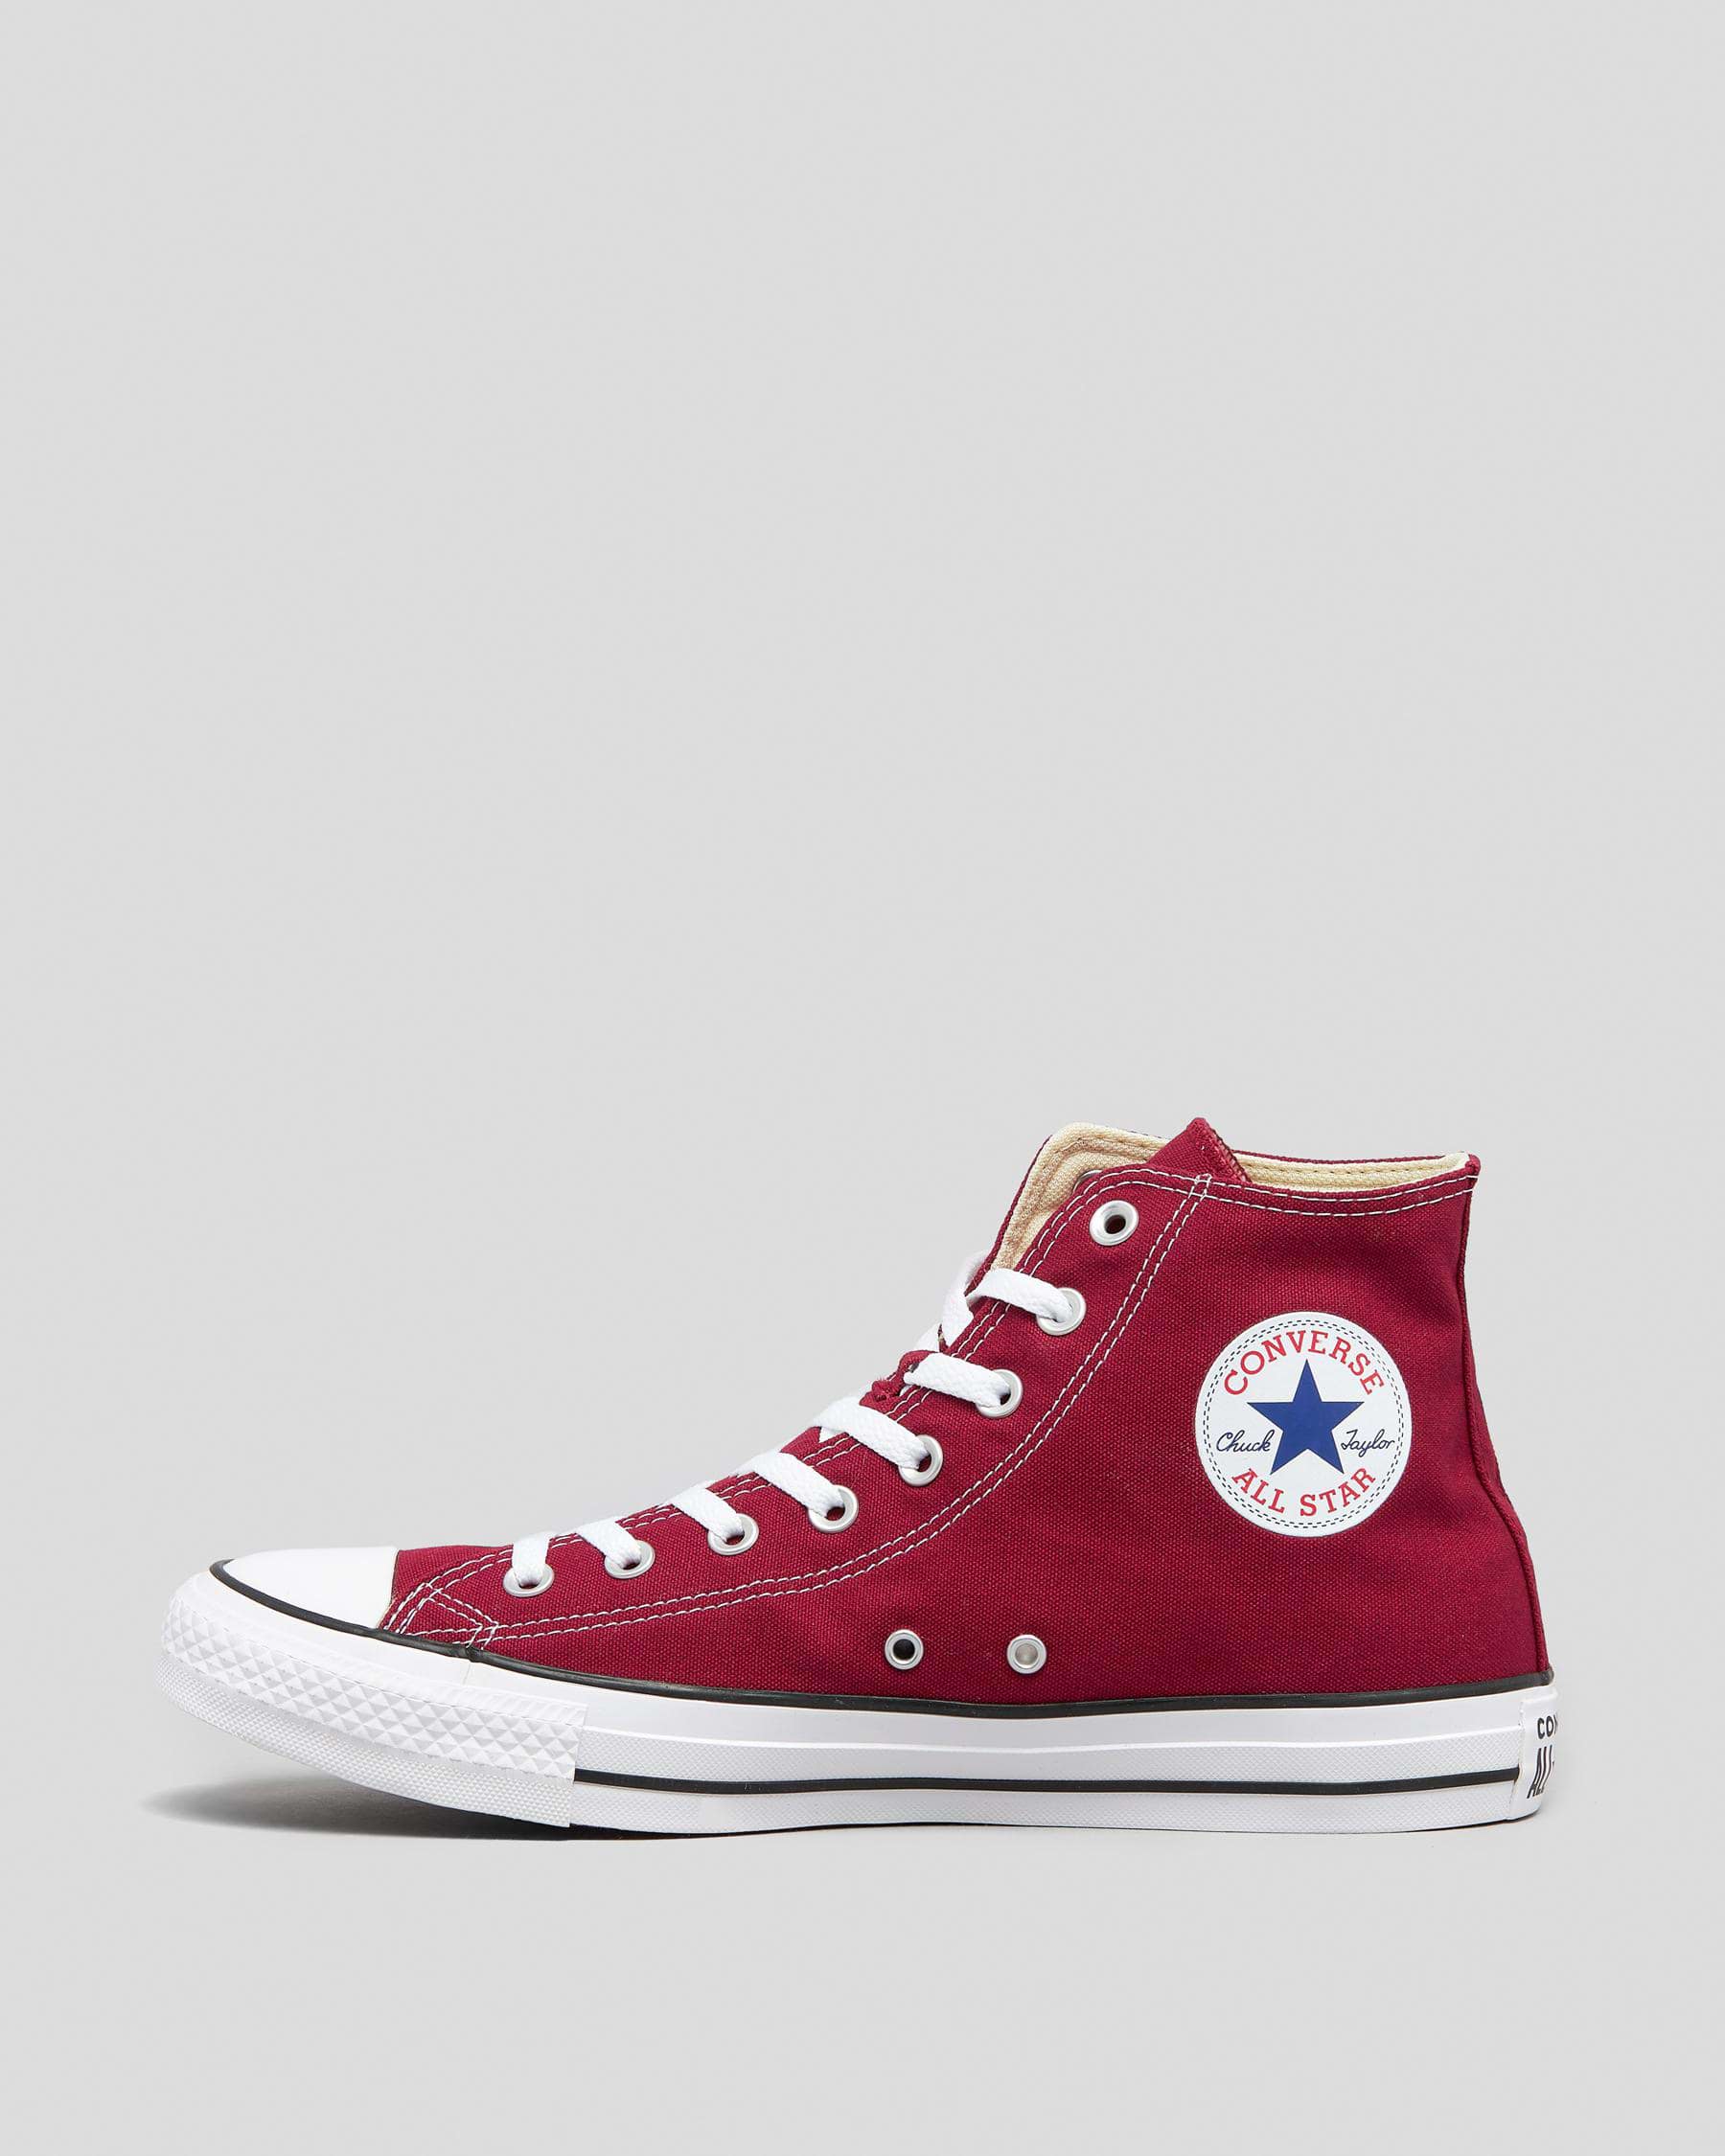 Converse Chuck Taylor All Star Shoes In Maroon - Fast Shipping & Easy ...